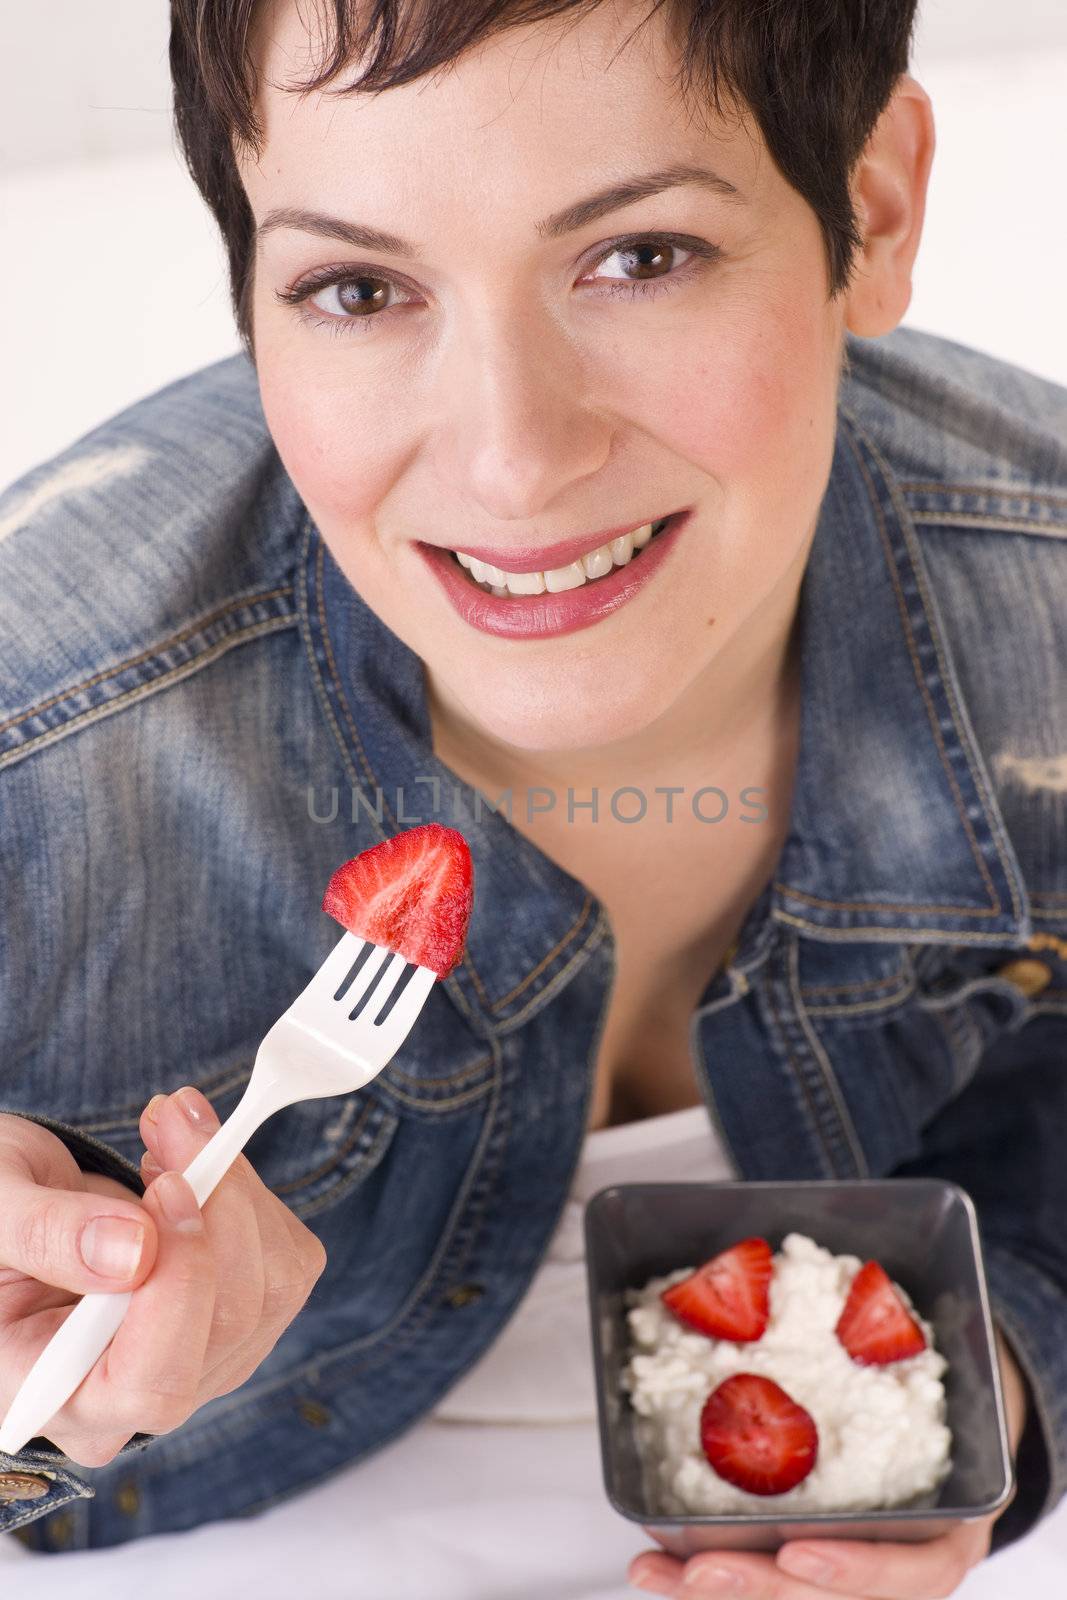 She eats a cottage Cheese salad